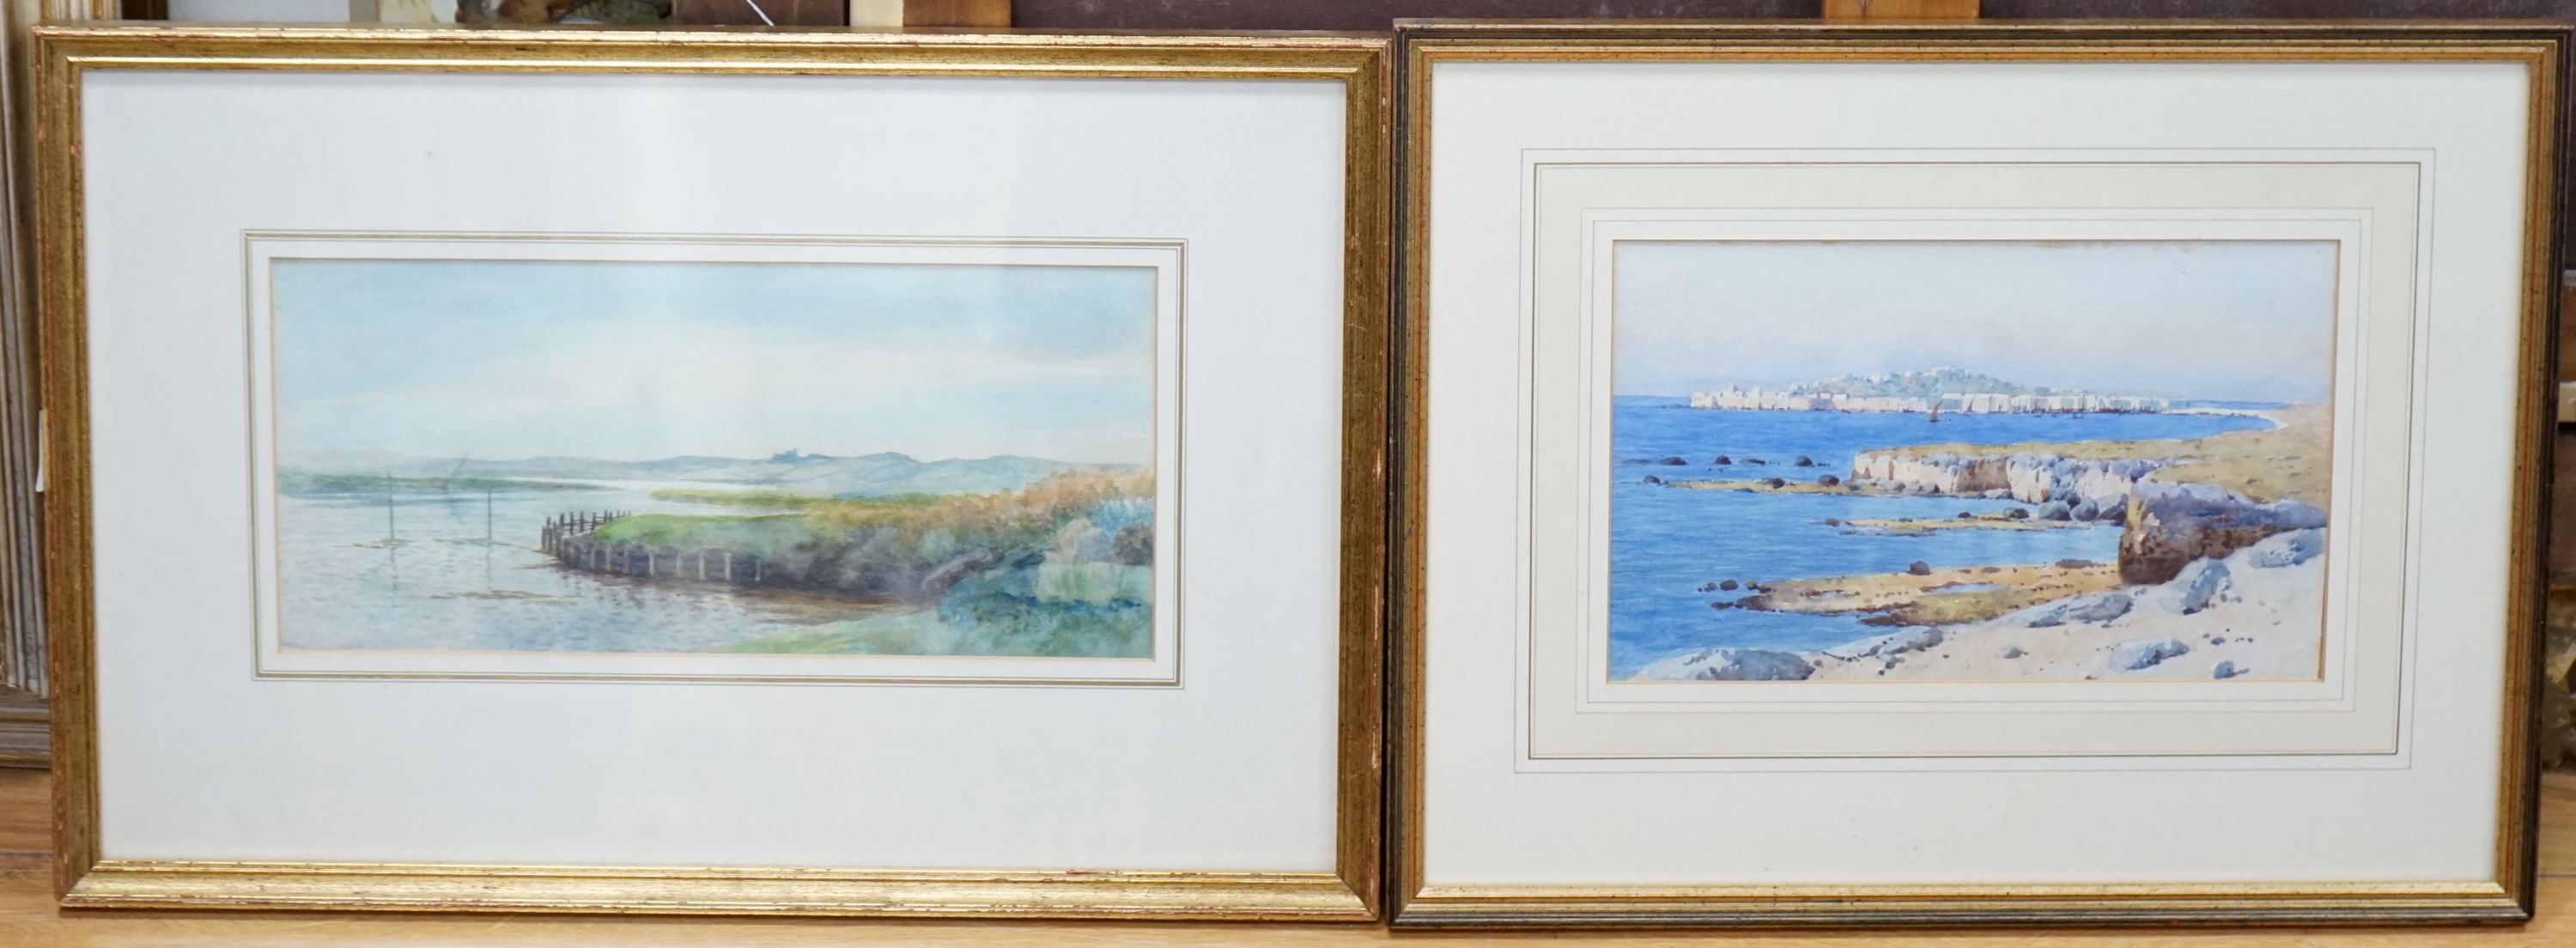 Charles Saunders, watercolour, 'Creek', label verso, 15 x 34cm and another watercolour of a